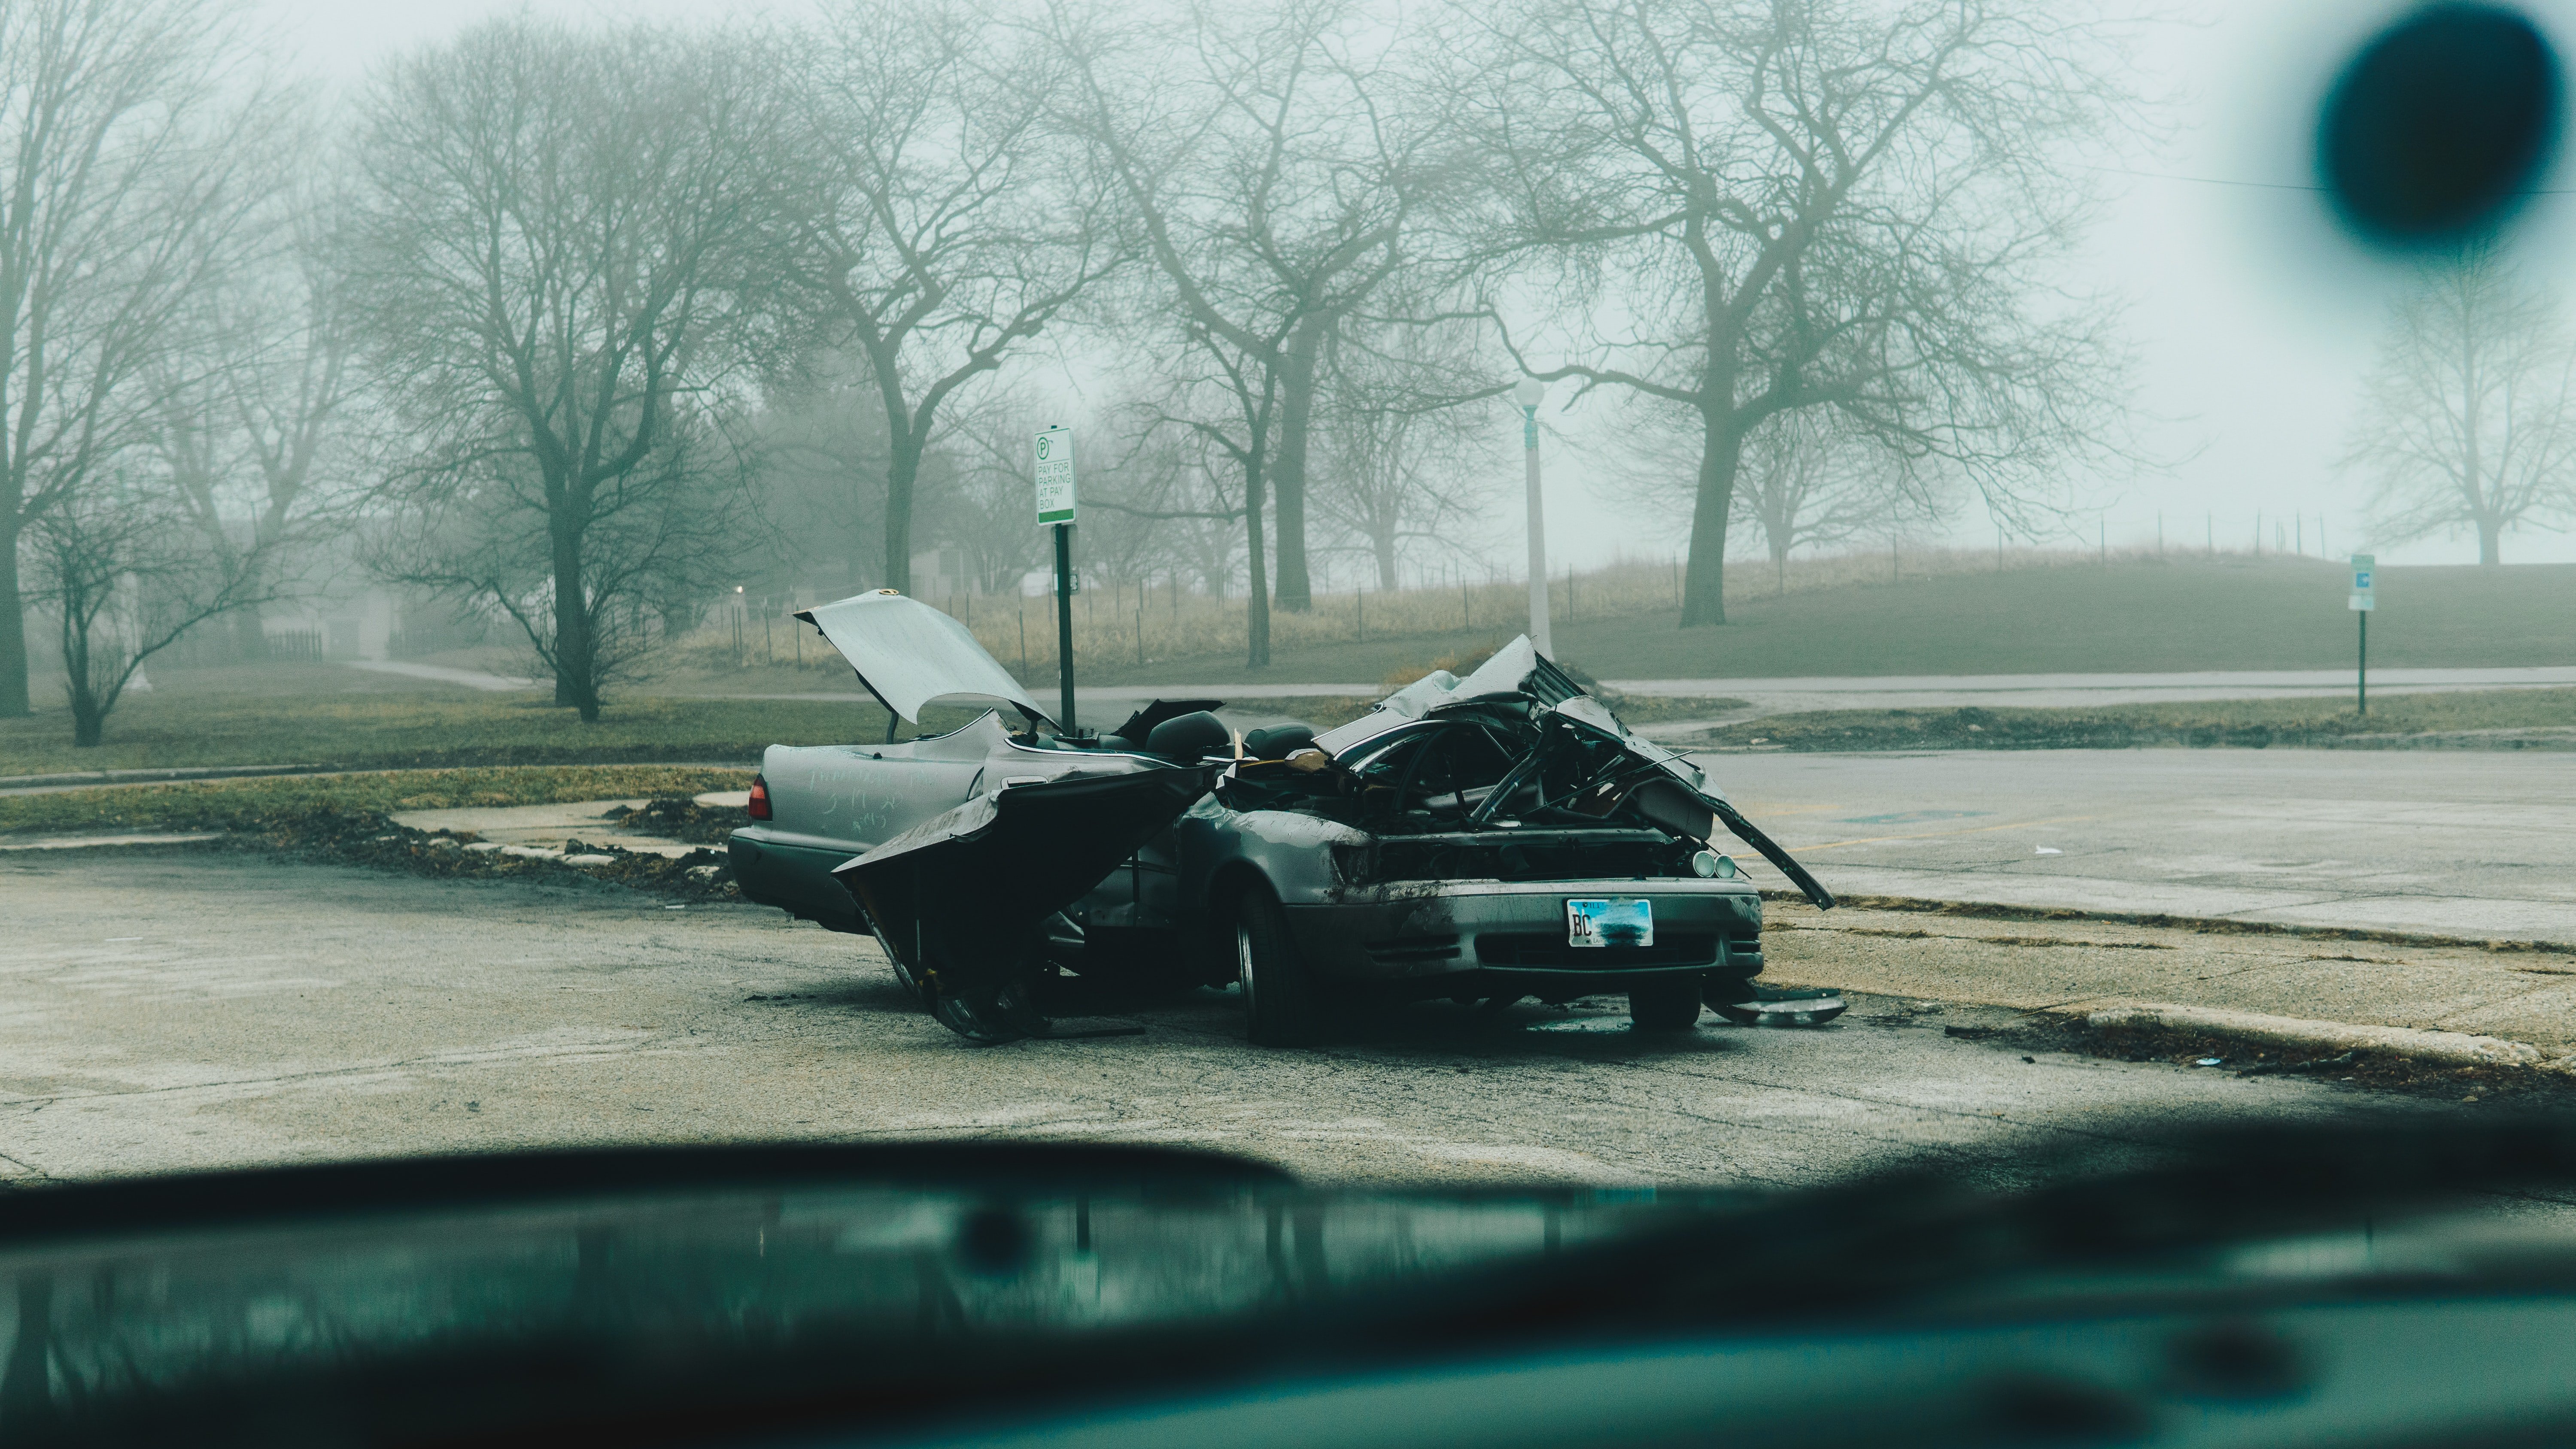 Jared's son Peter had been injured in a car accident and passed away. | Source: Unsplash